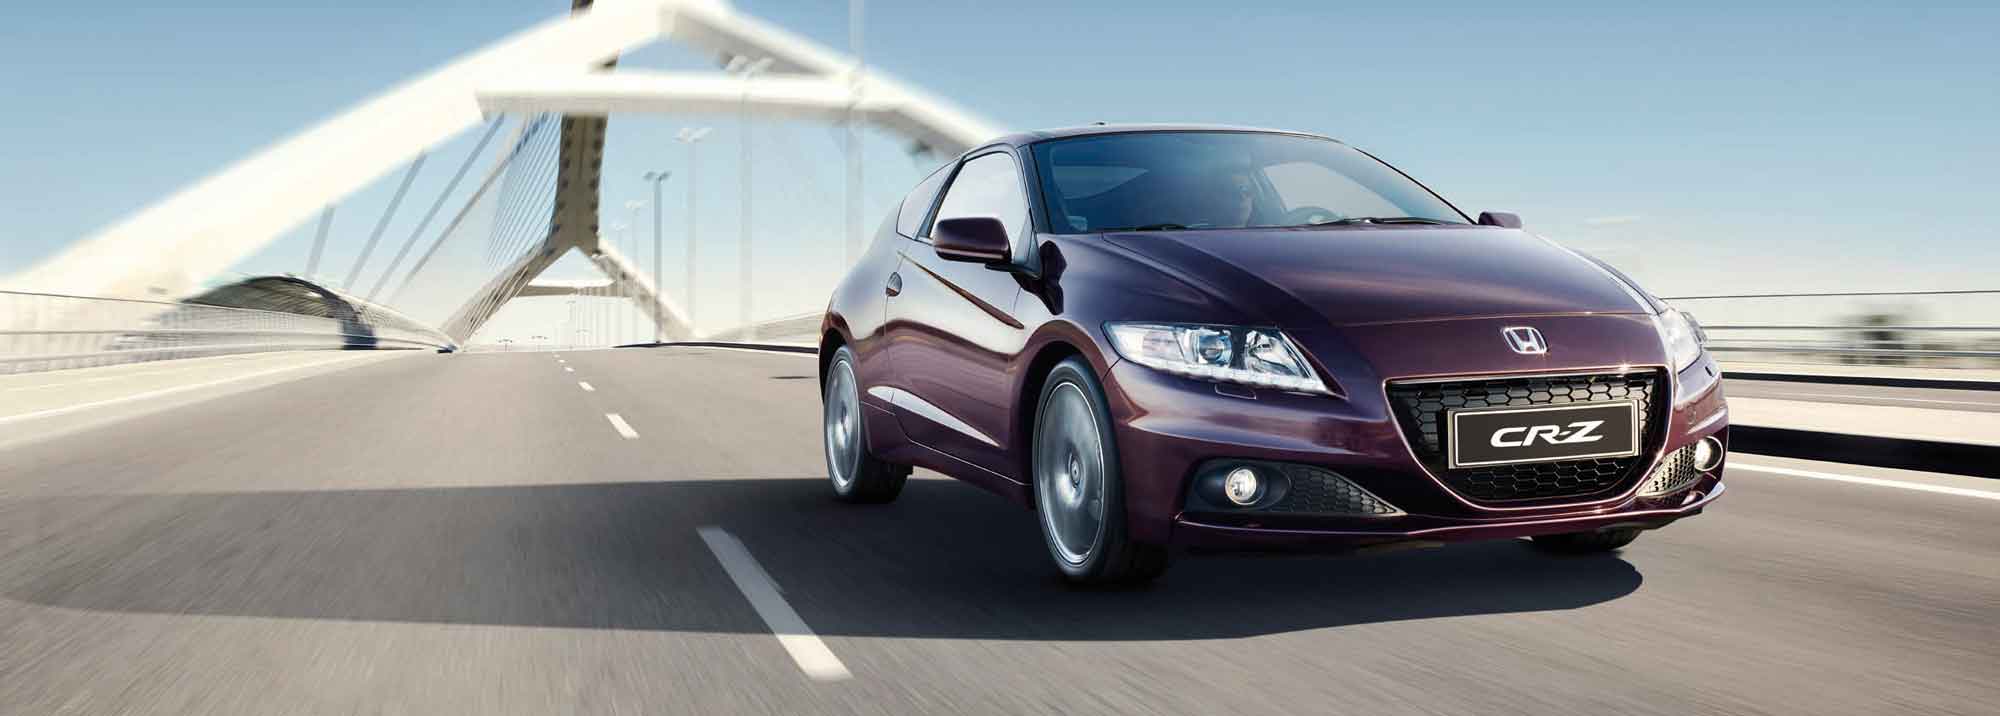 The Honda CR-Z: A sporty hybrid that challenged conventional notions of performance and efficiency video-banner